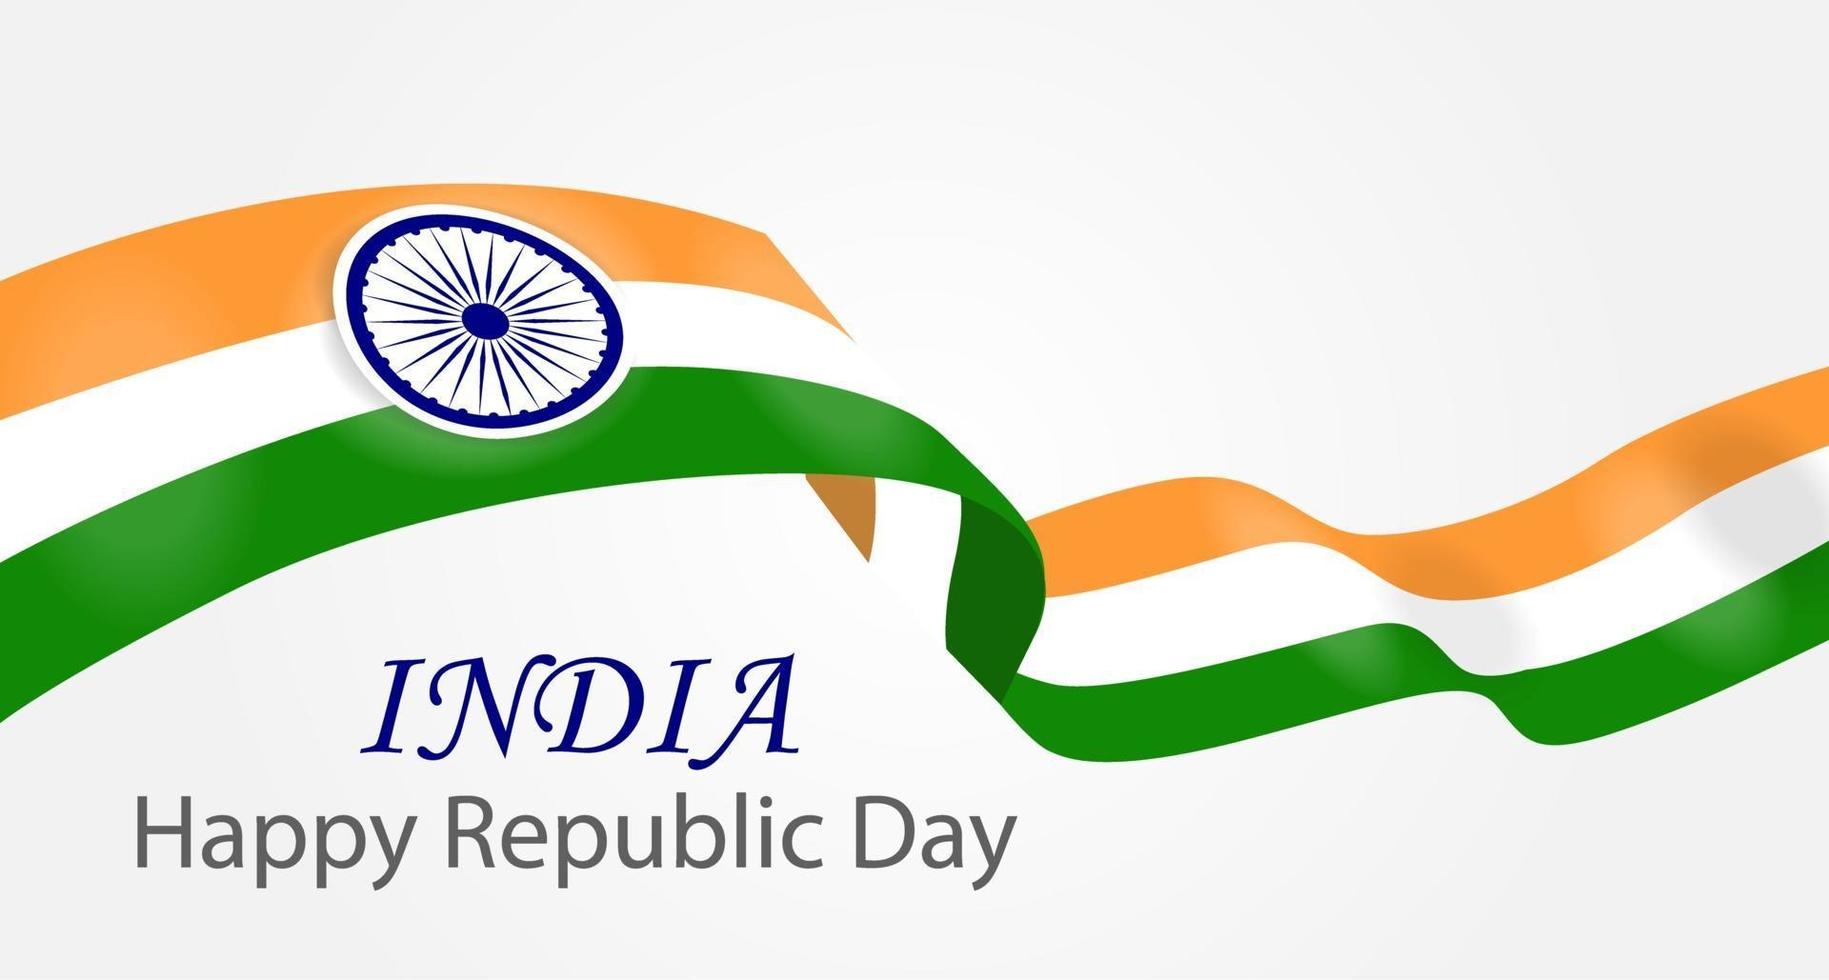 Indian national flag vector image